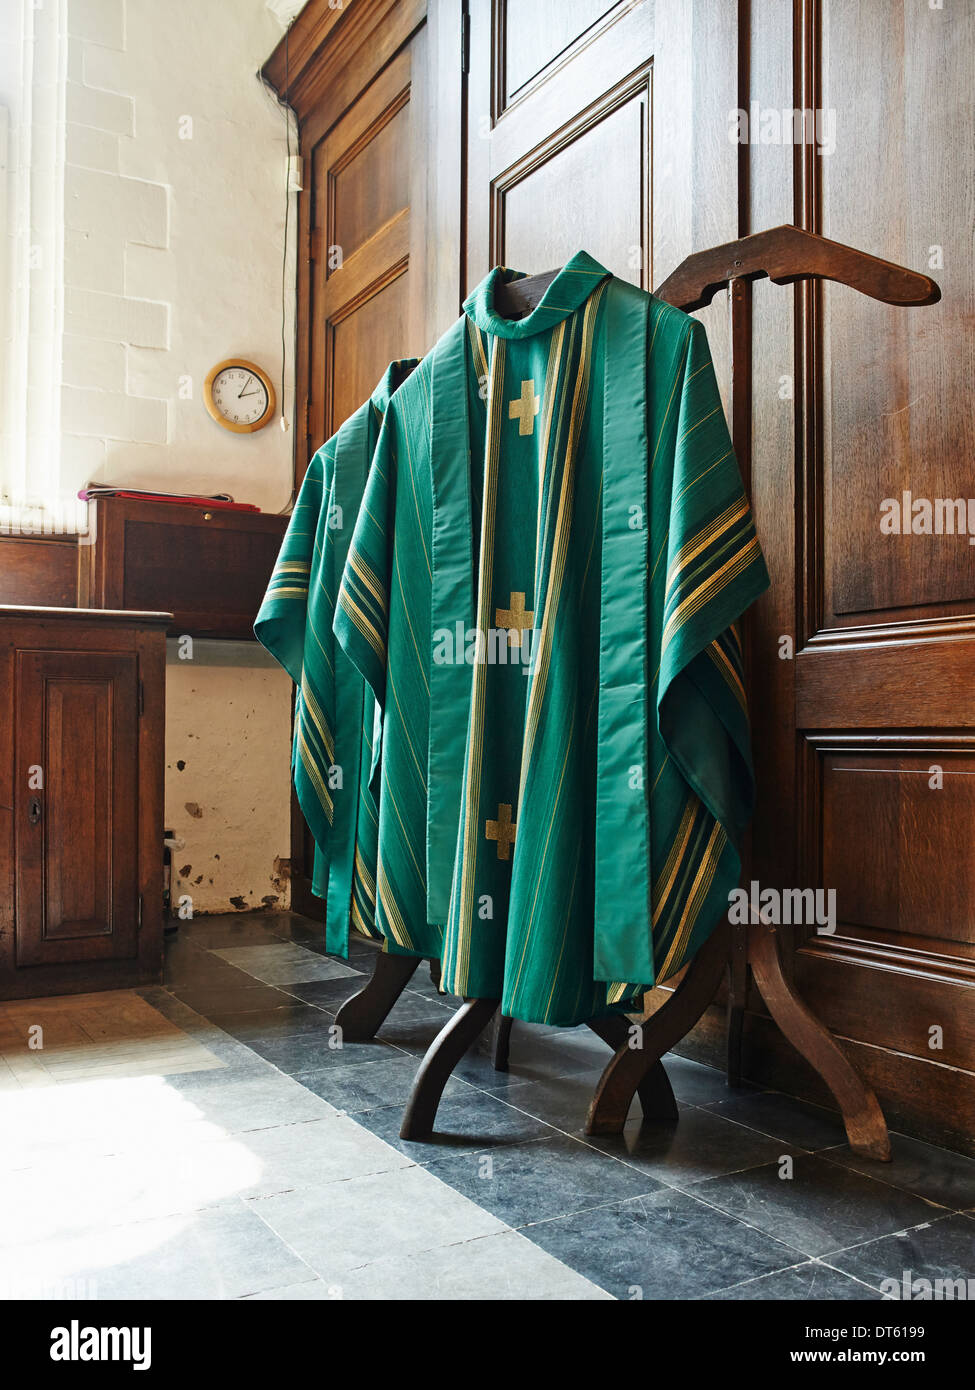 Green religious robes hanging in church interior Stock Photo